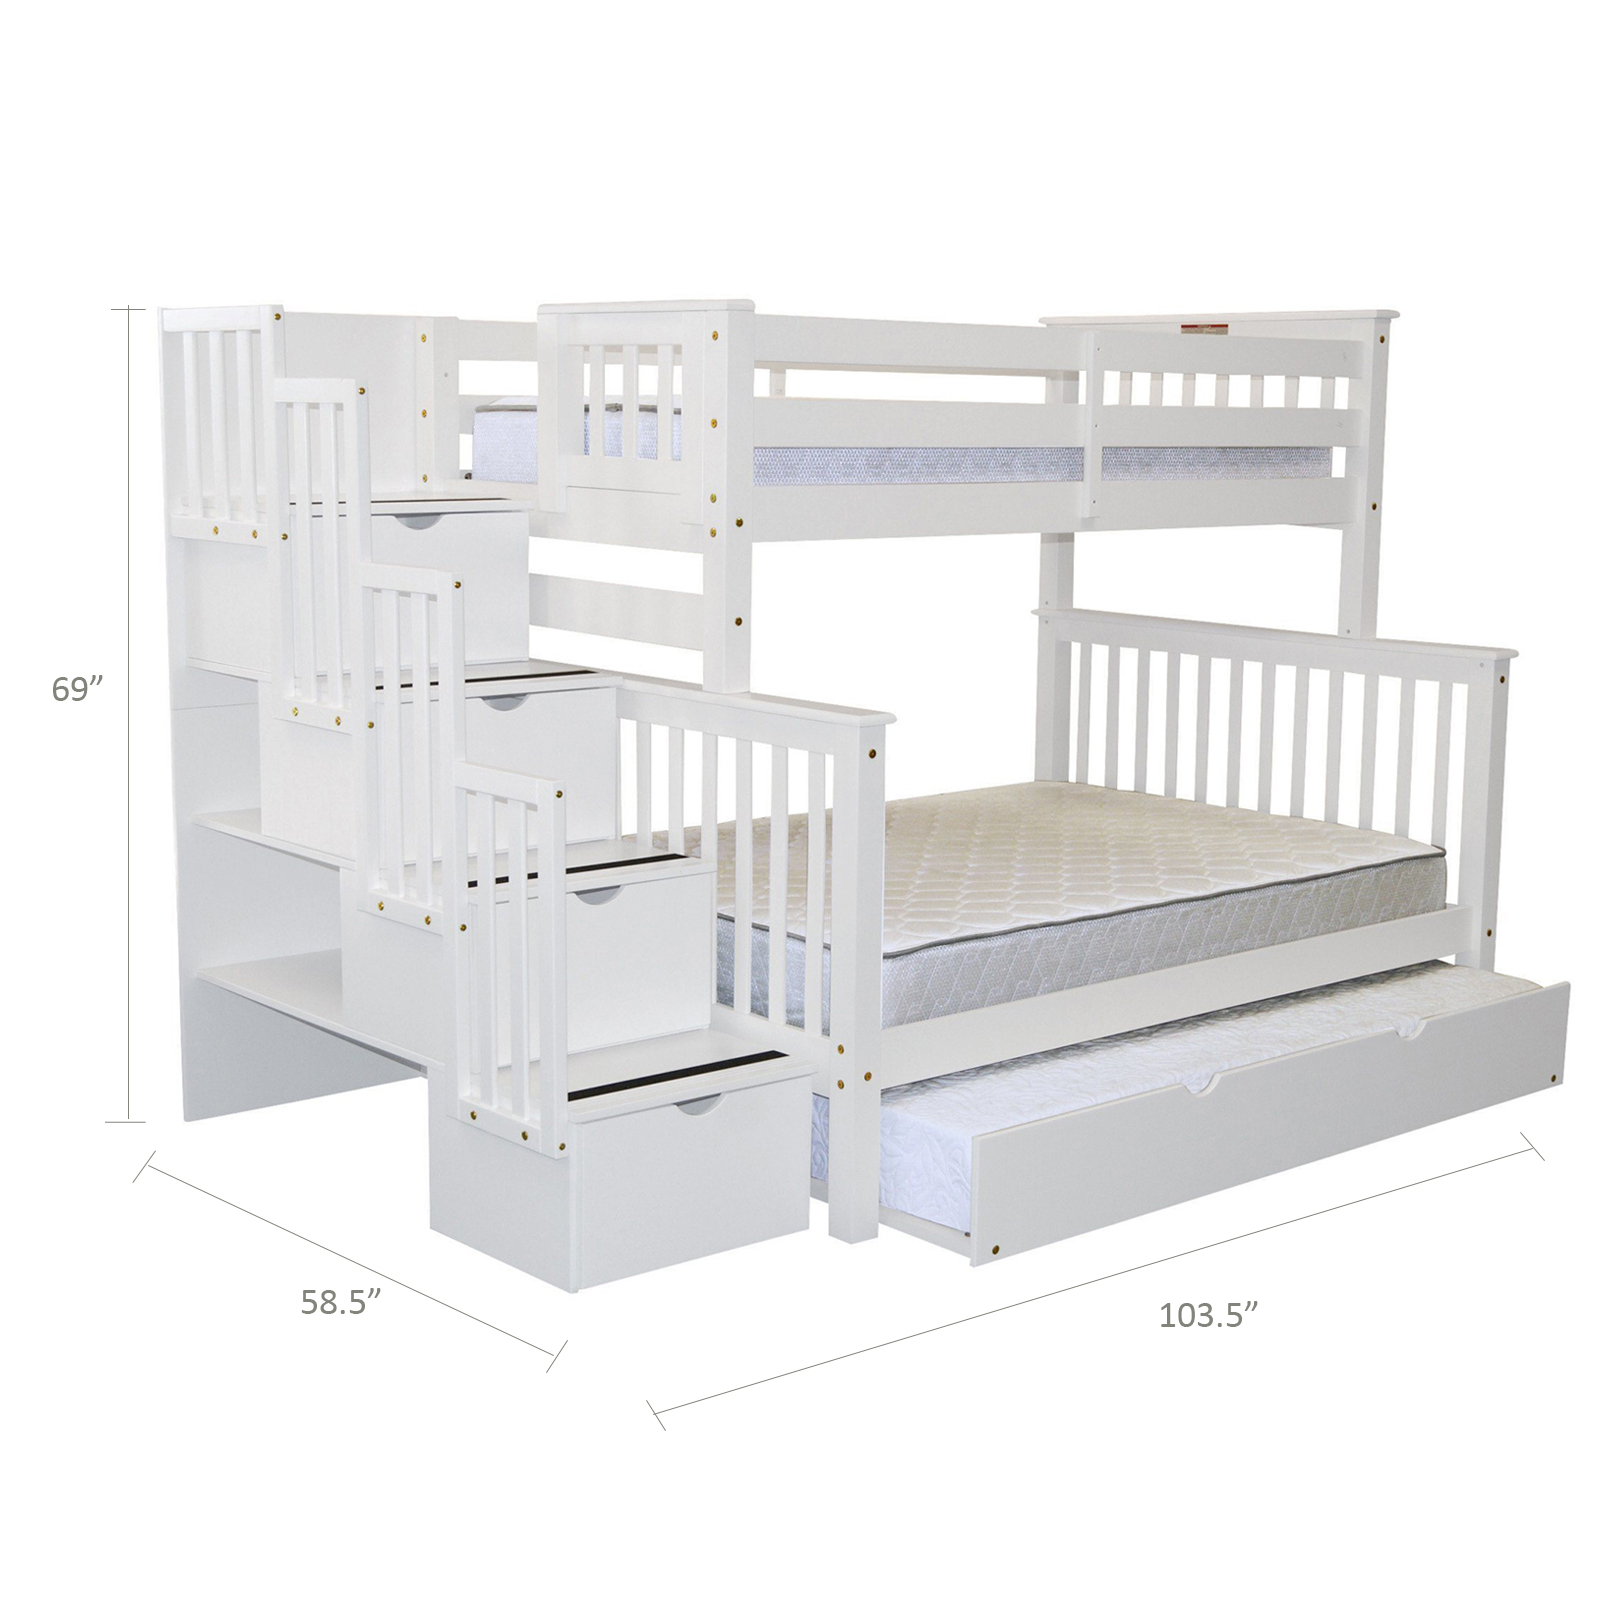 Bedz King White Stairway Twin Over Full, Sears Wooden Bunk Beds